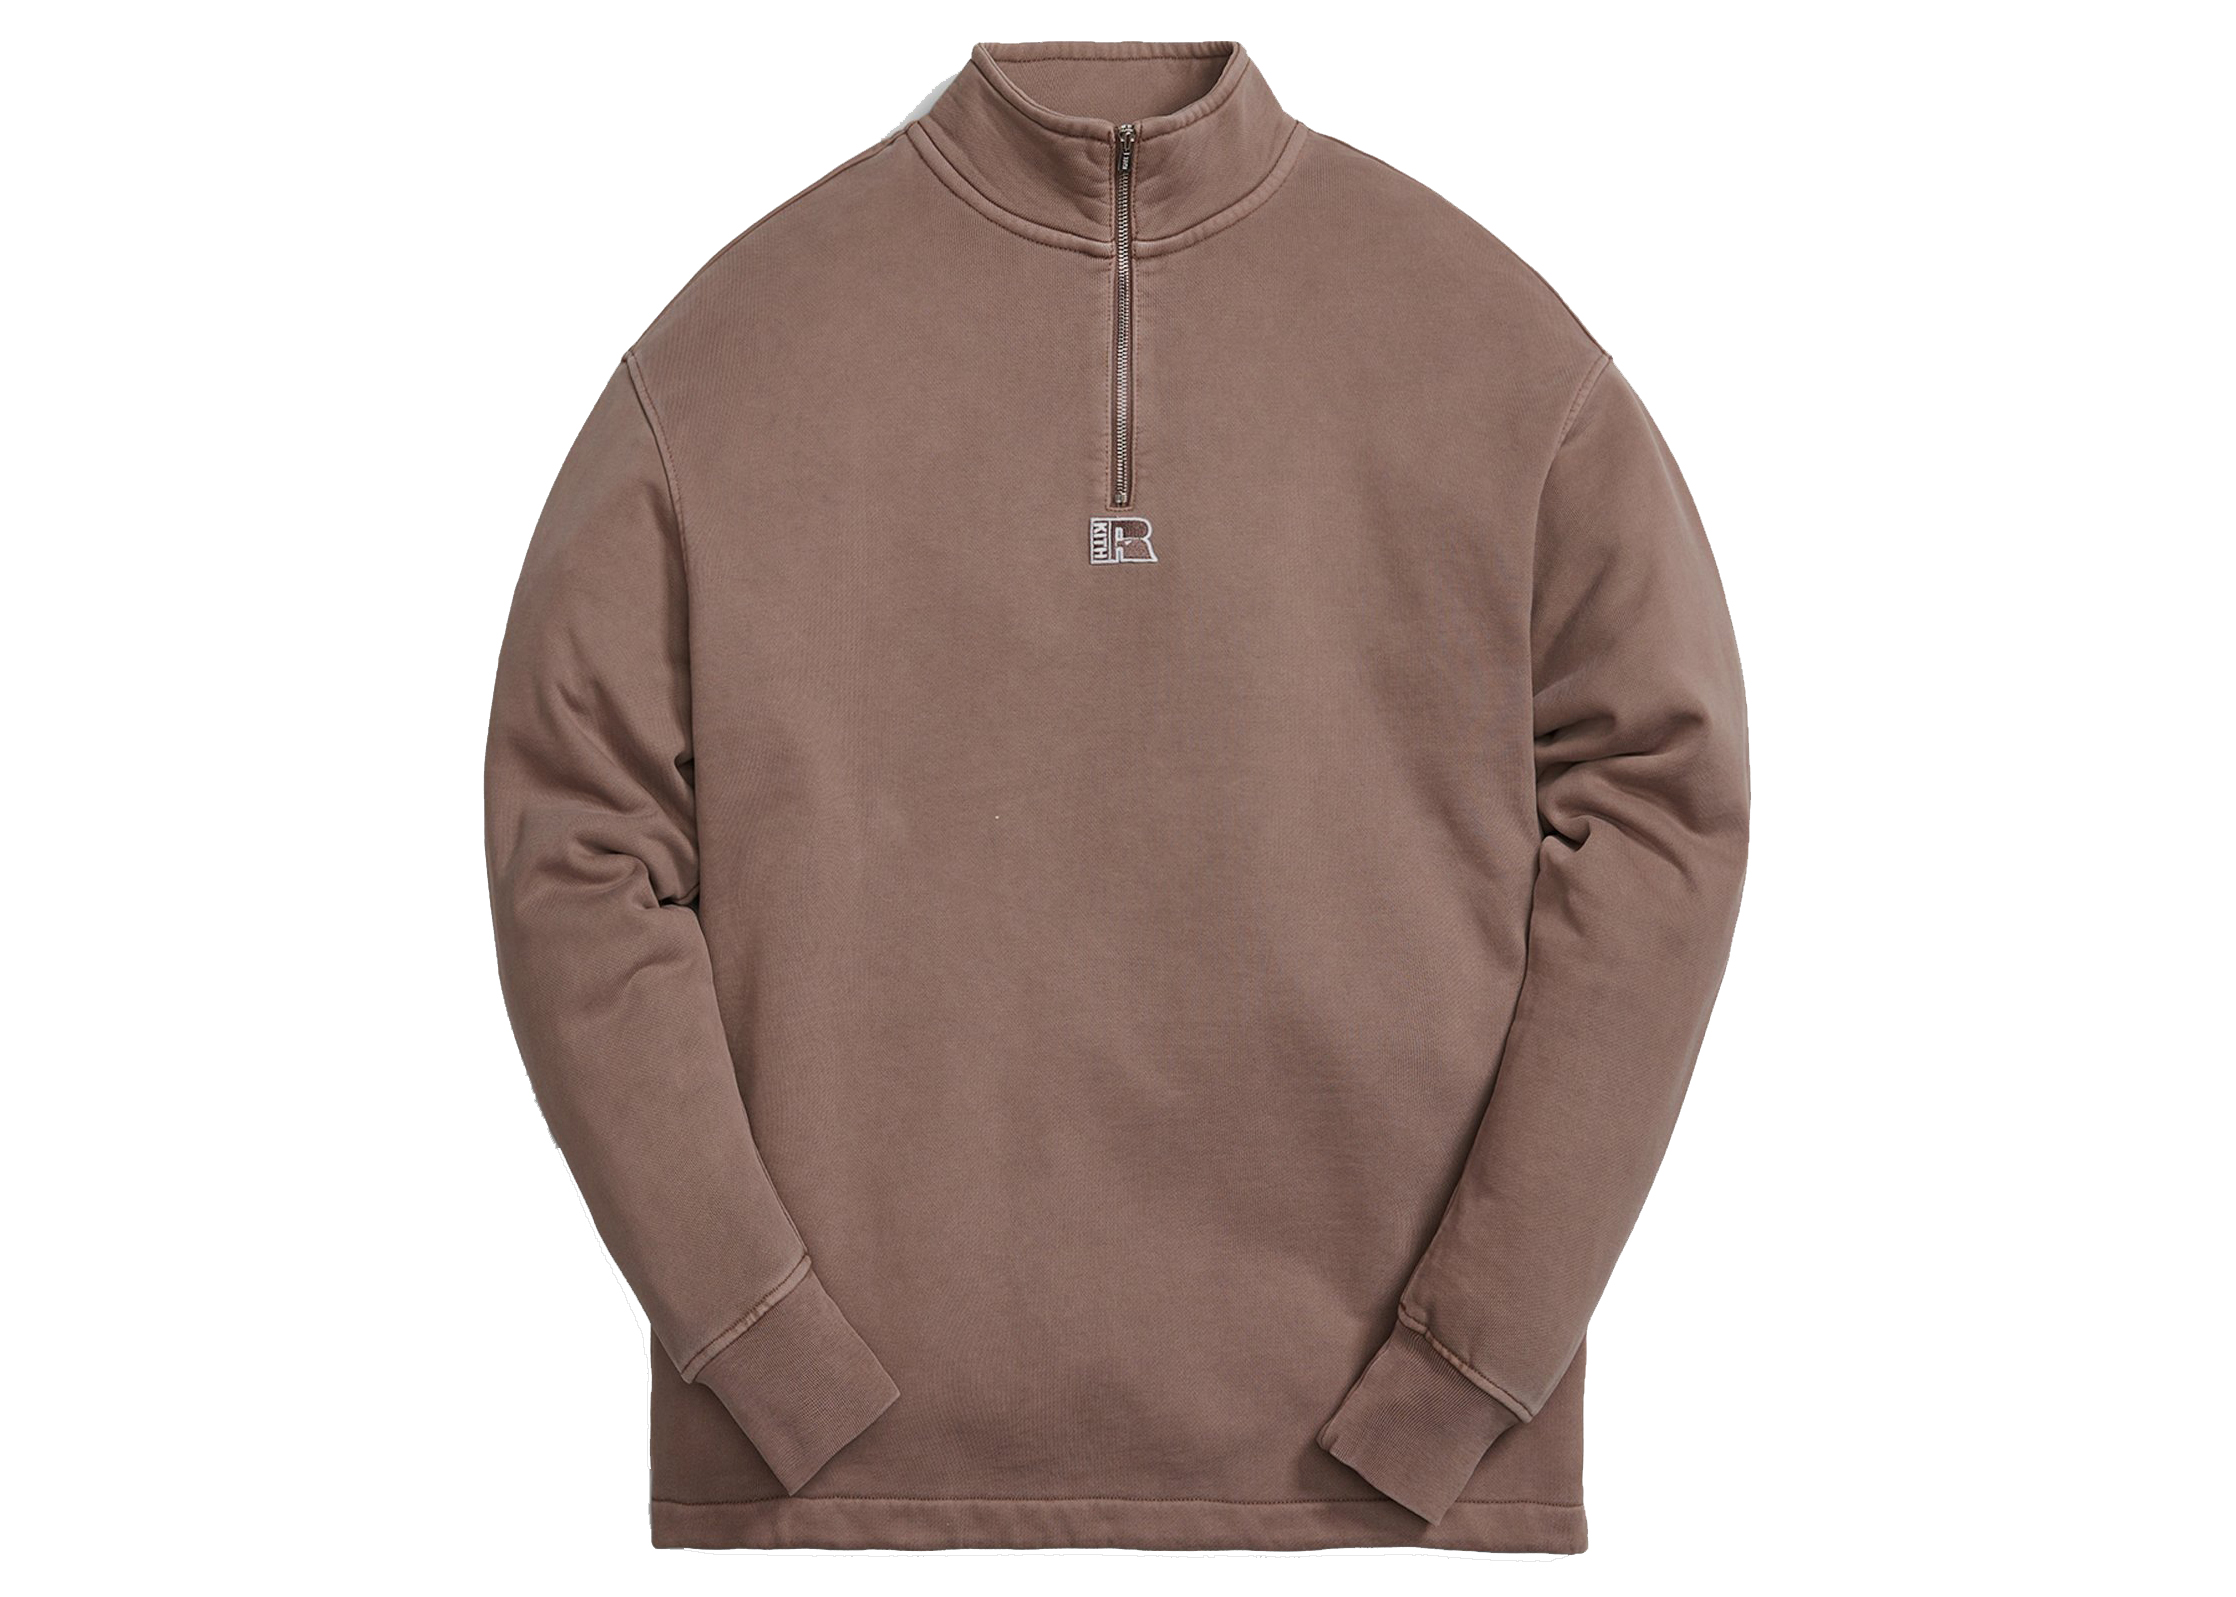 Kith　×　Russell　　AW21 Classic Quarter Zip